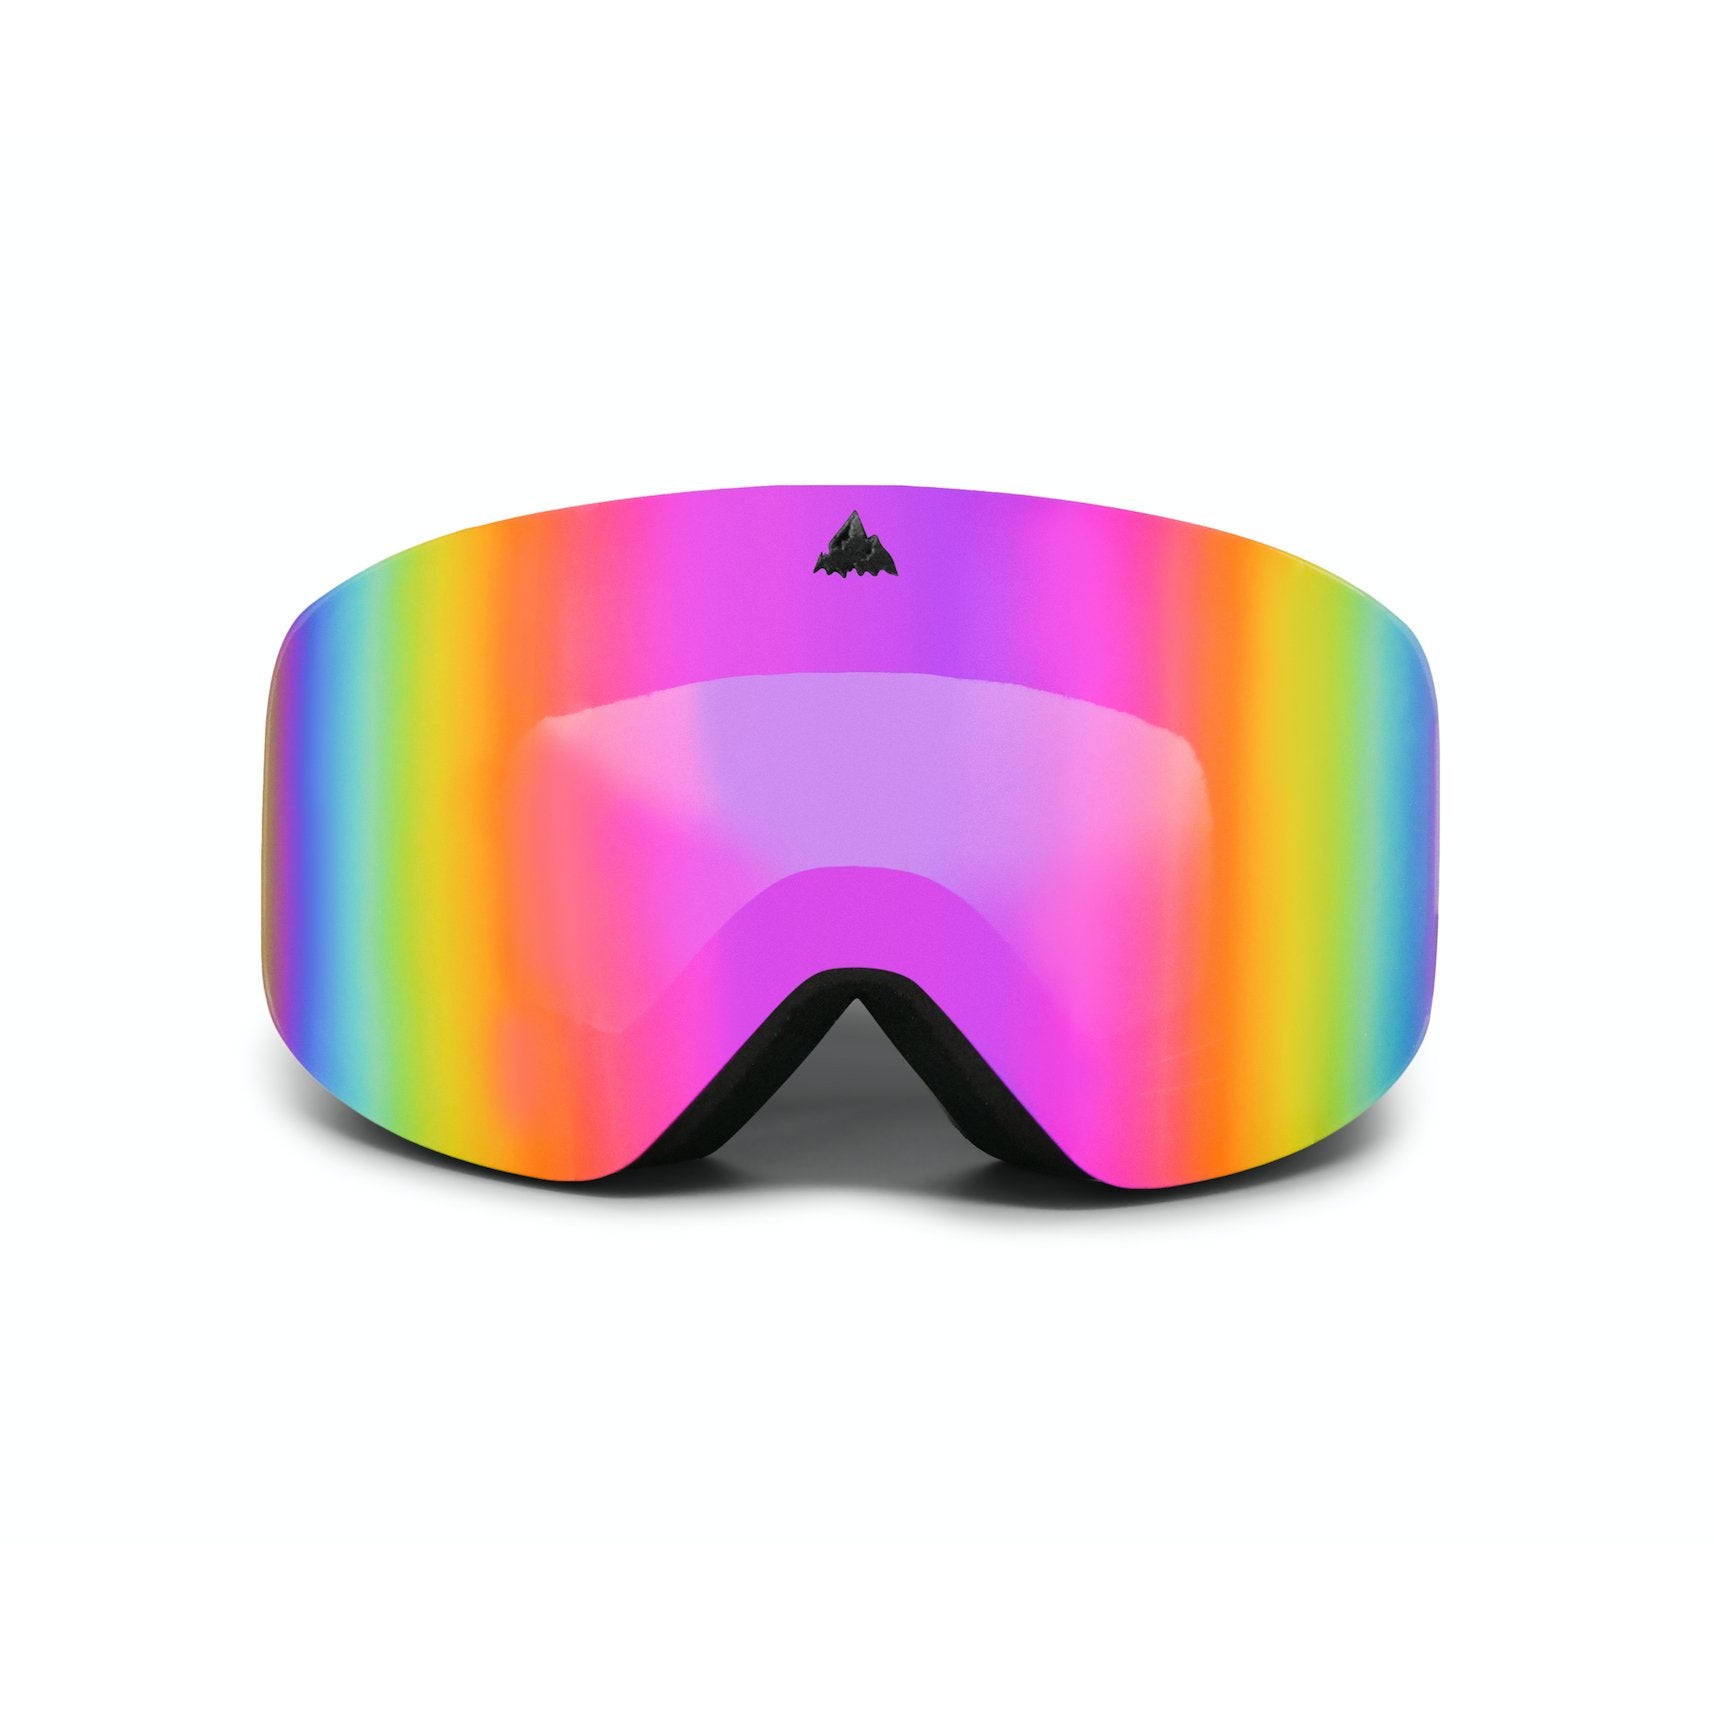 Higher Cylindrical Goggles - Classic Edition - Teton Gravity Research